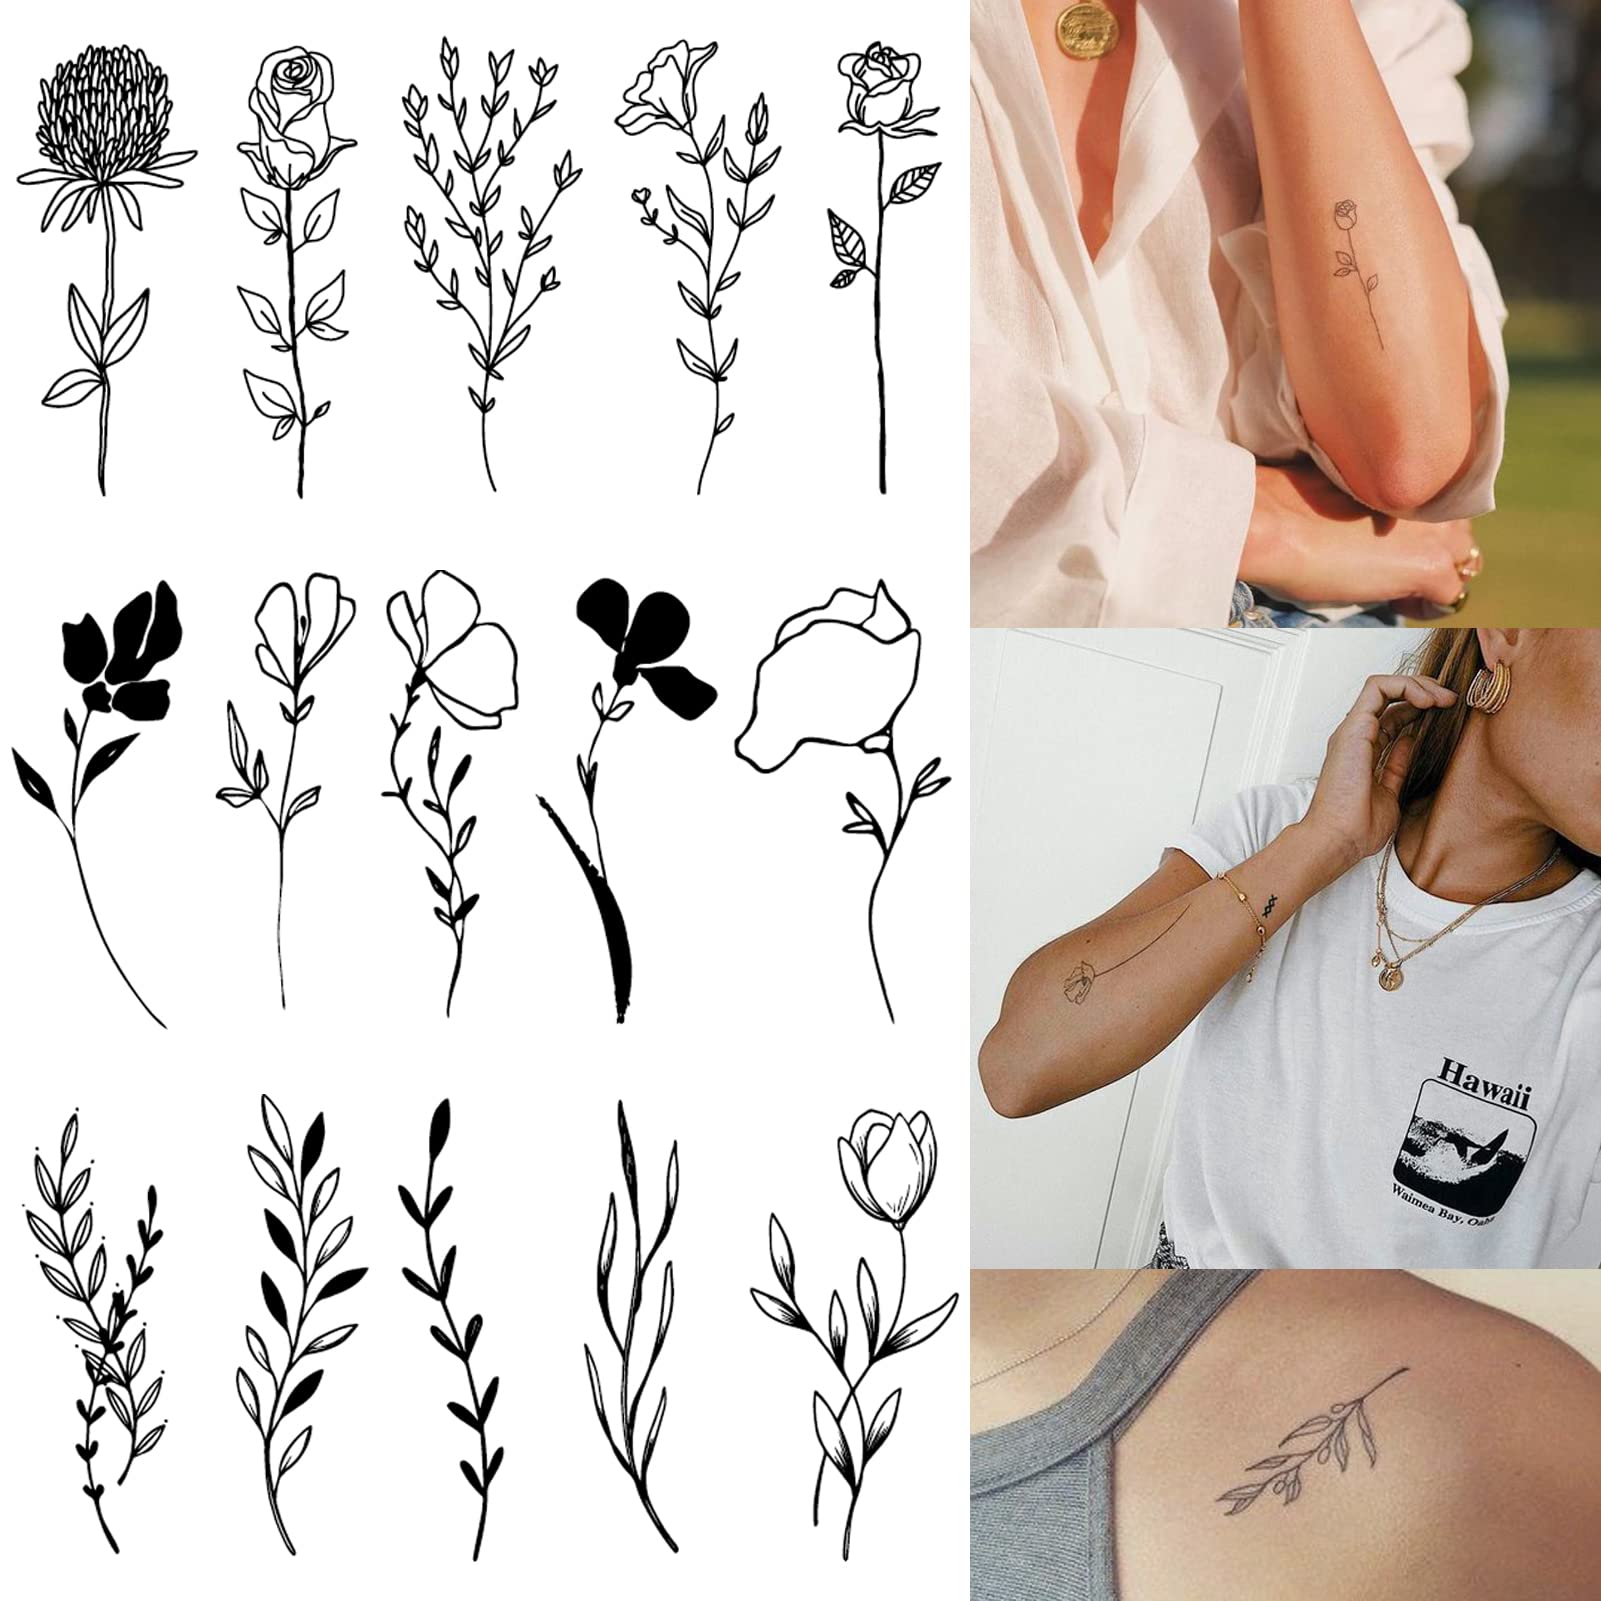 Inkjet Temporary Tattoo Paper use with your printer to make Amazing Tattoos